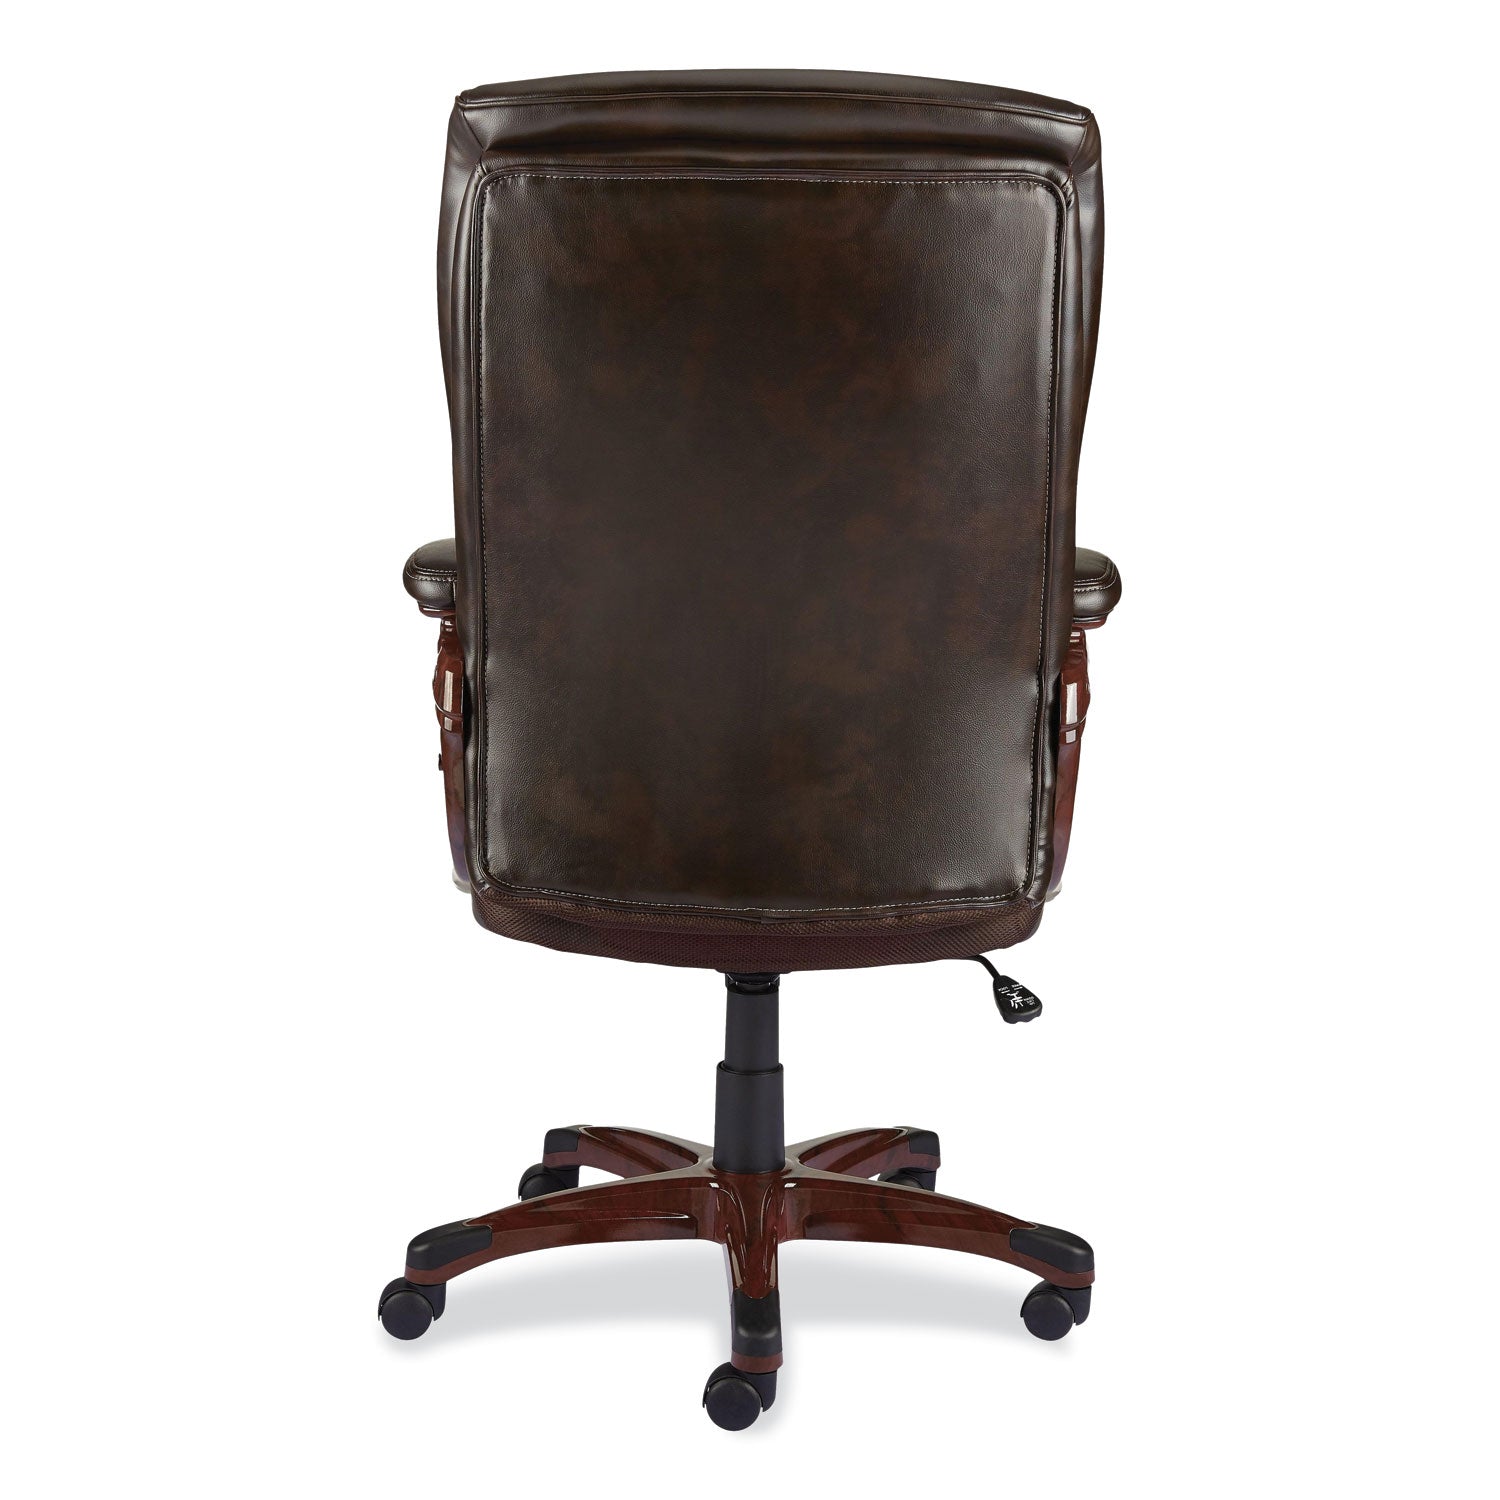 Alera Darnick Series Manager Chair, Supports Up to 275 lbs, 17.13" to 20.12" Seat Height, Brown Seat/Back, Brown Base - 3